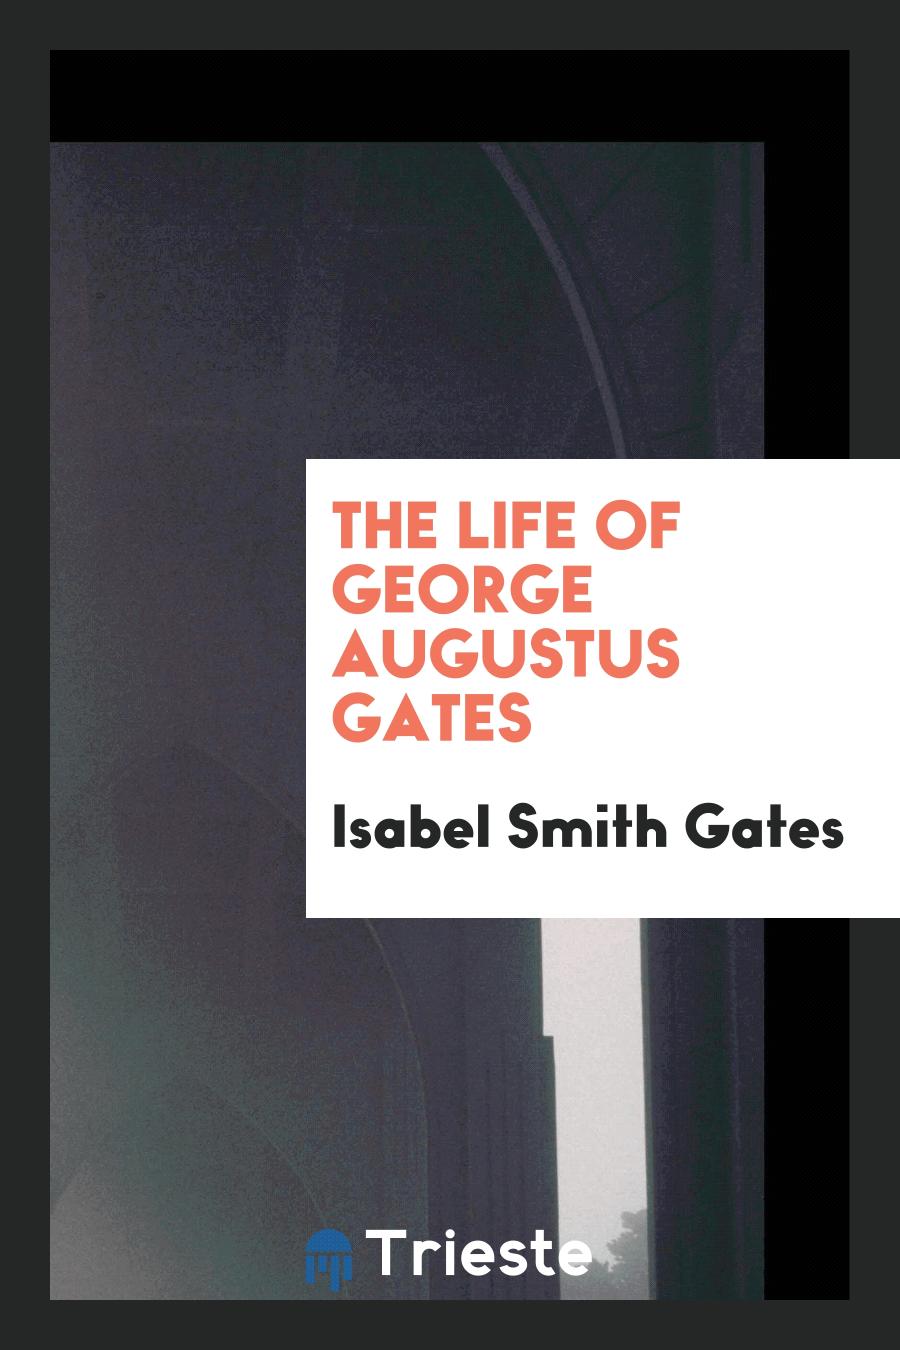 The Life of George Augustus Gates